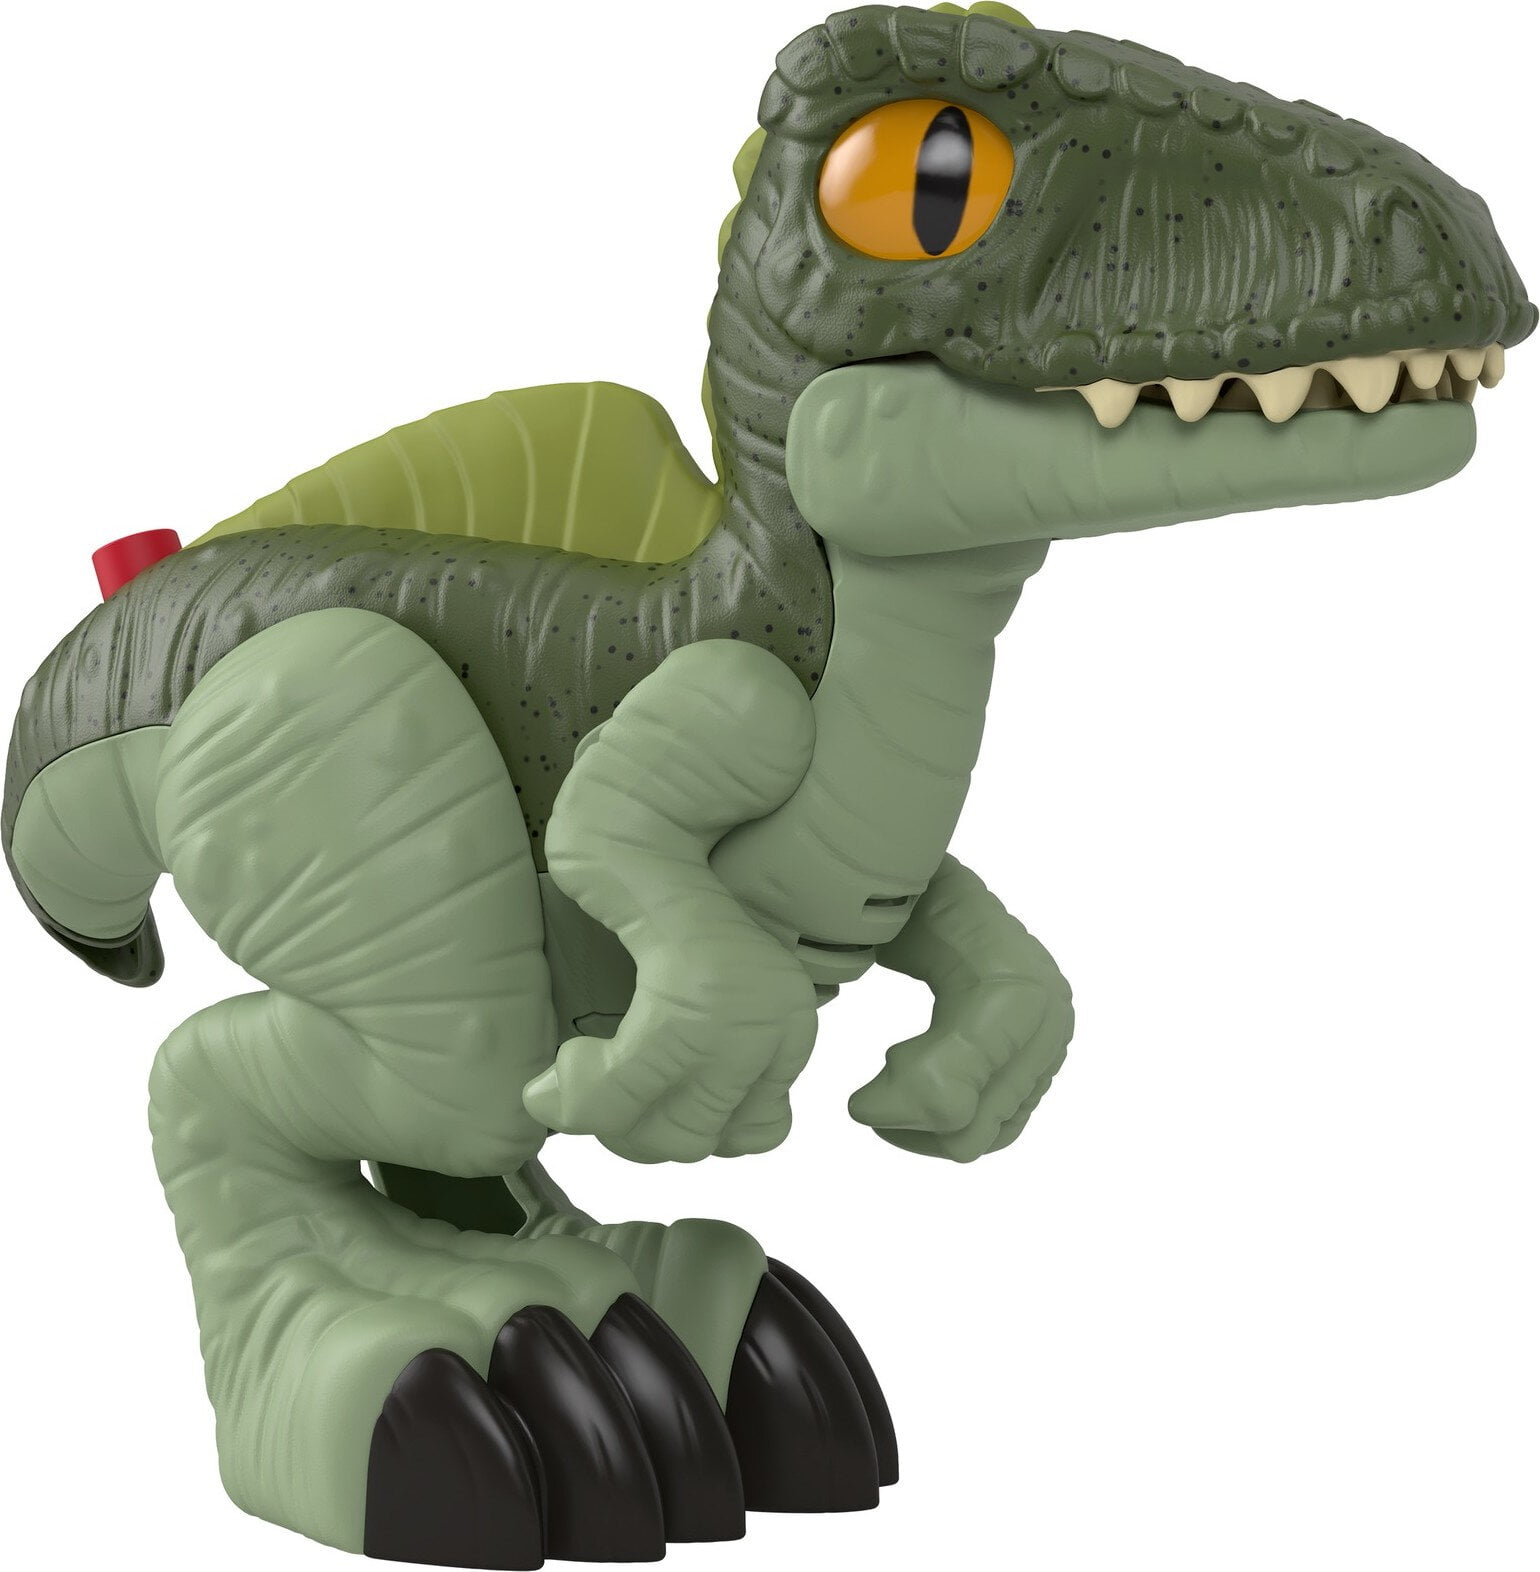 Imaginext Jurassic World Dominion Deluxe Growlin Giga XL Dinosaur Toy with Lights & Sounds